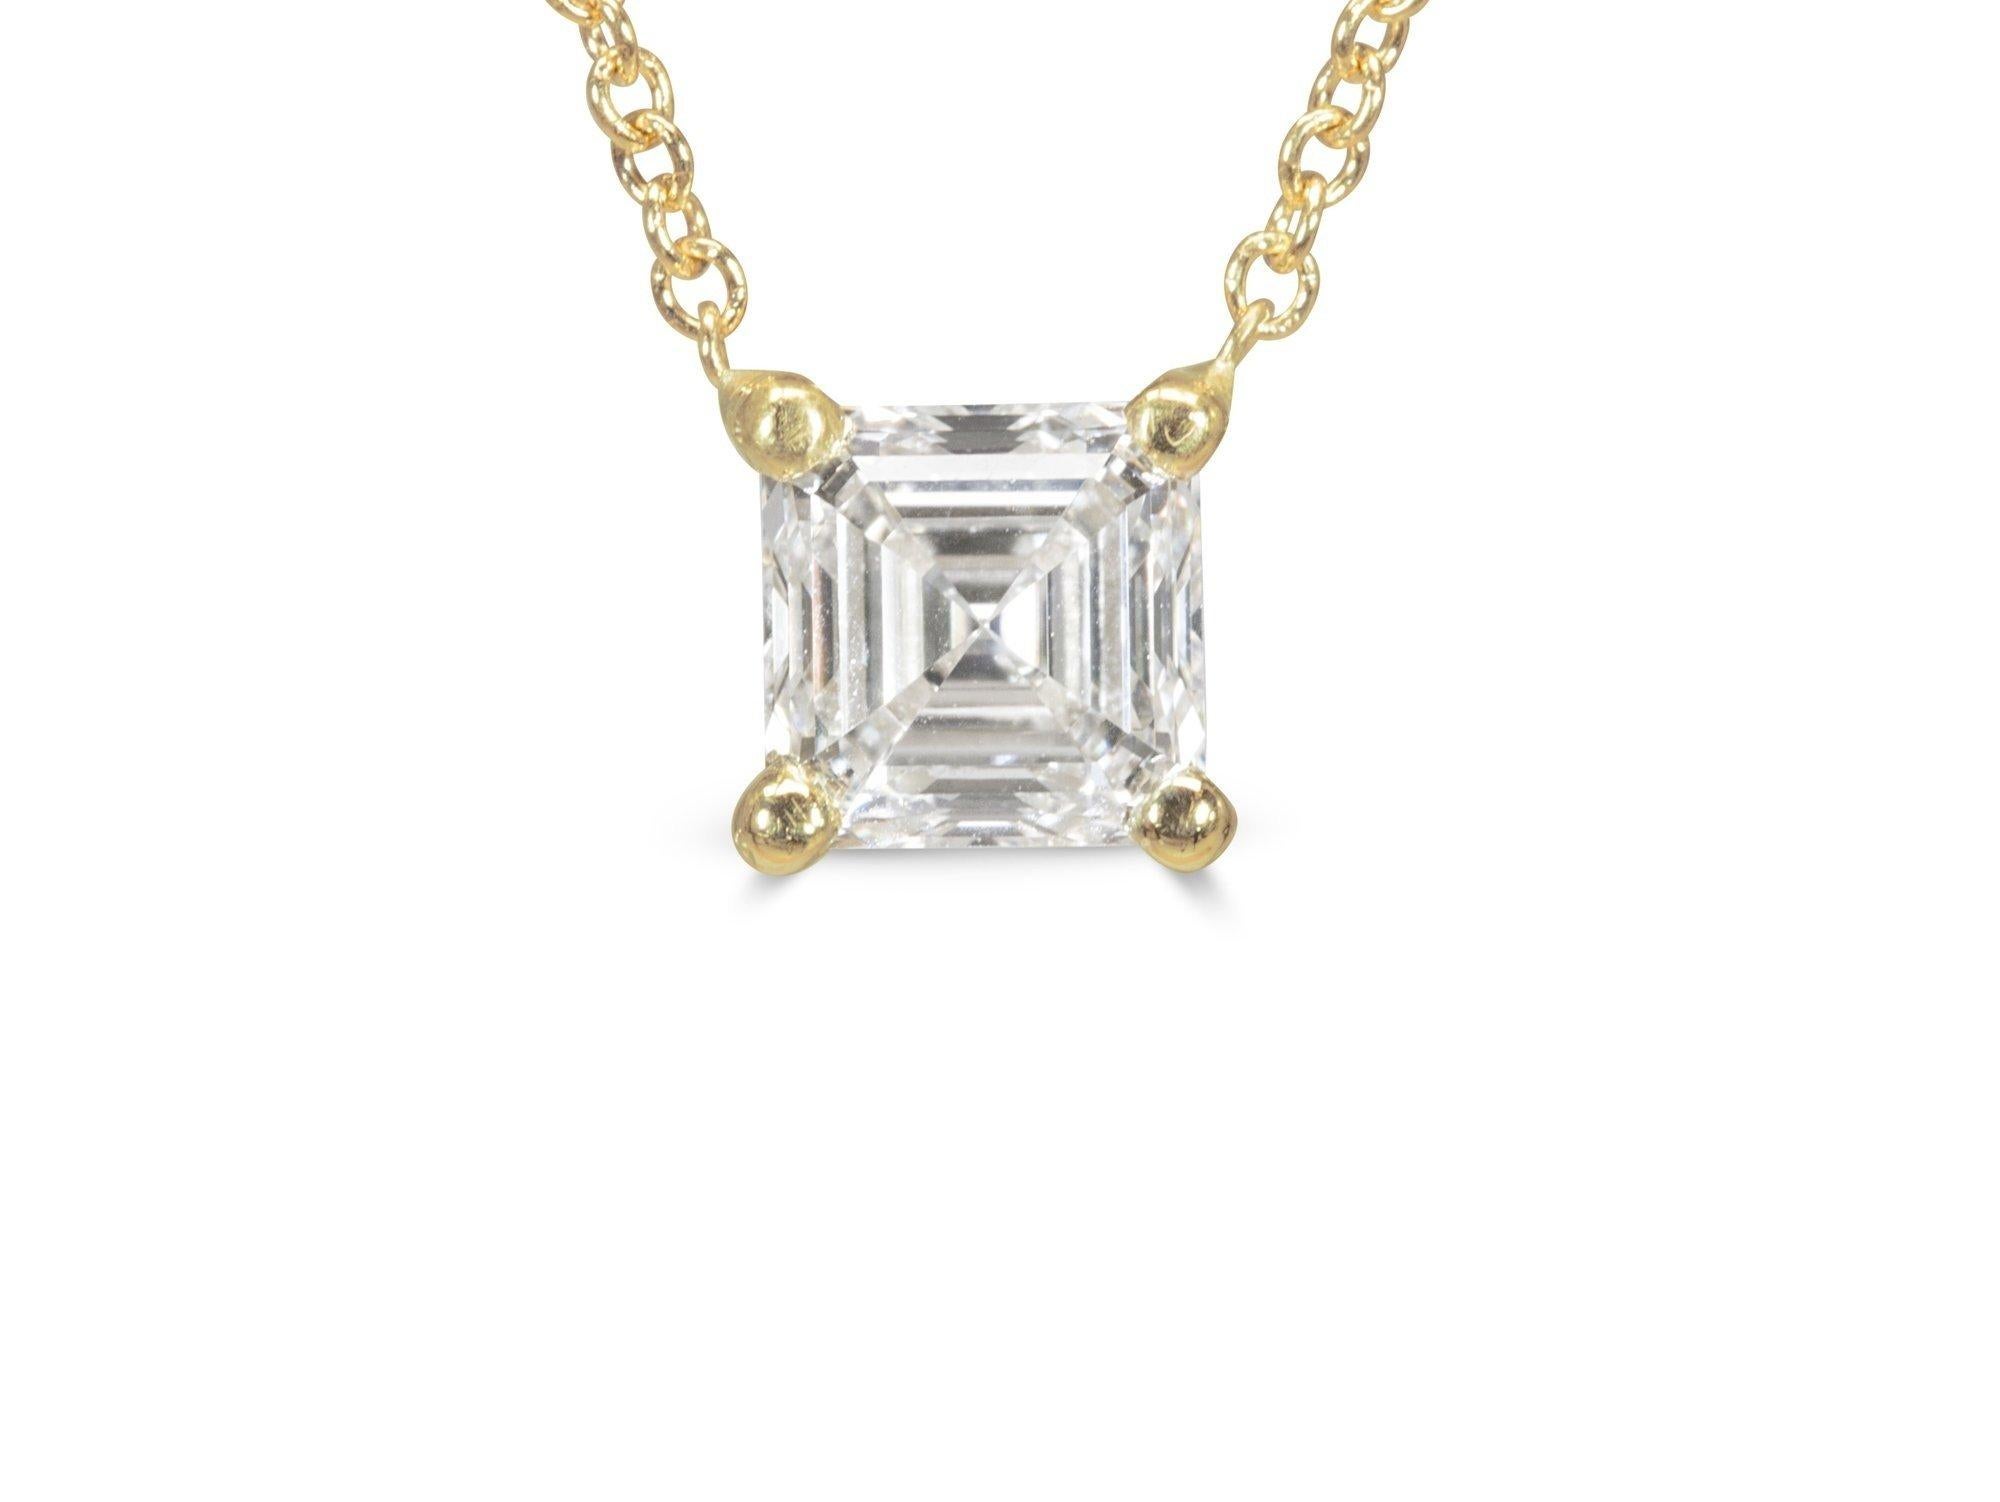 Stunning Necklace with a dazzling 1-carat square cut natural diamond 1